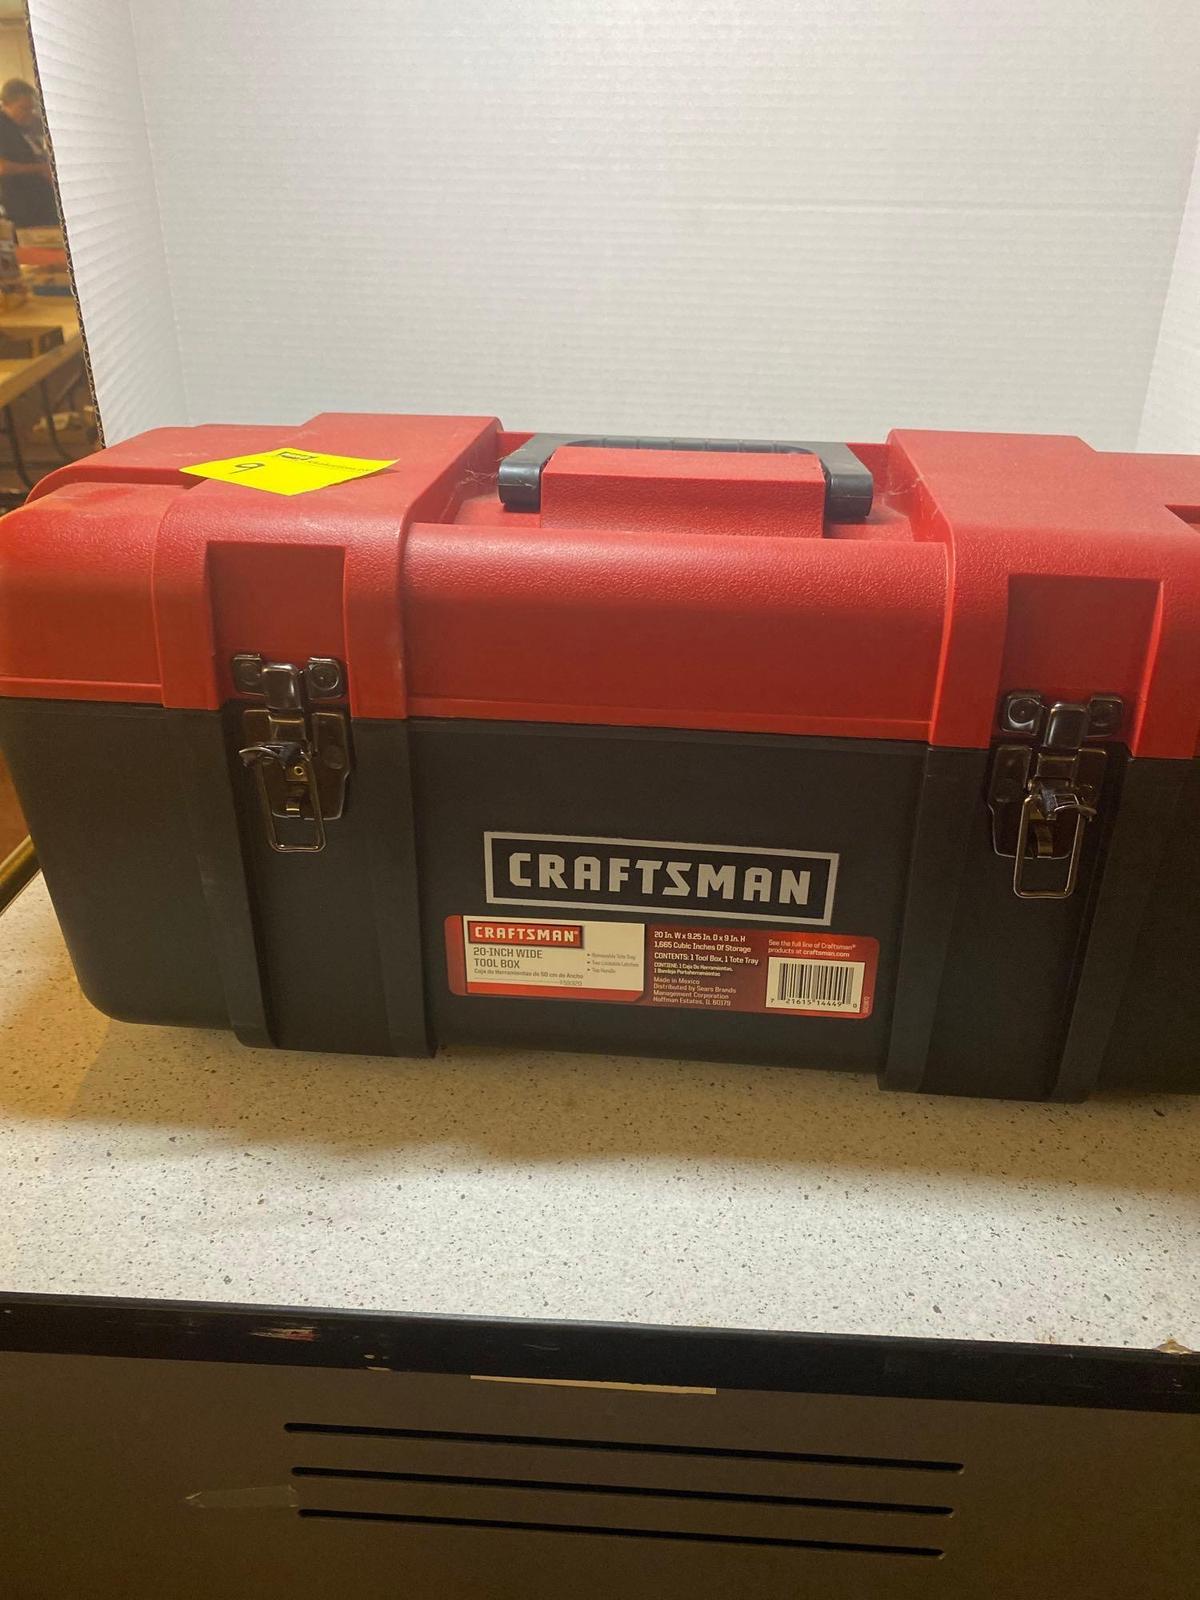 Craftsman Toolbox with Plumber Supplies